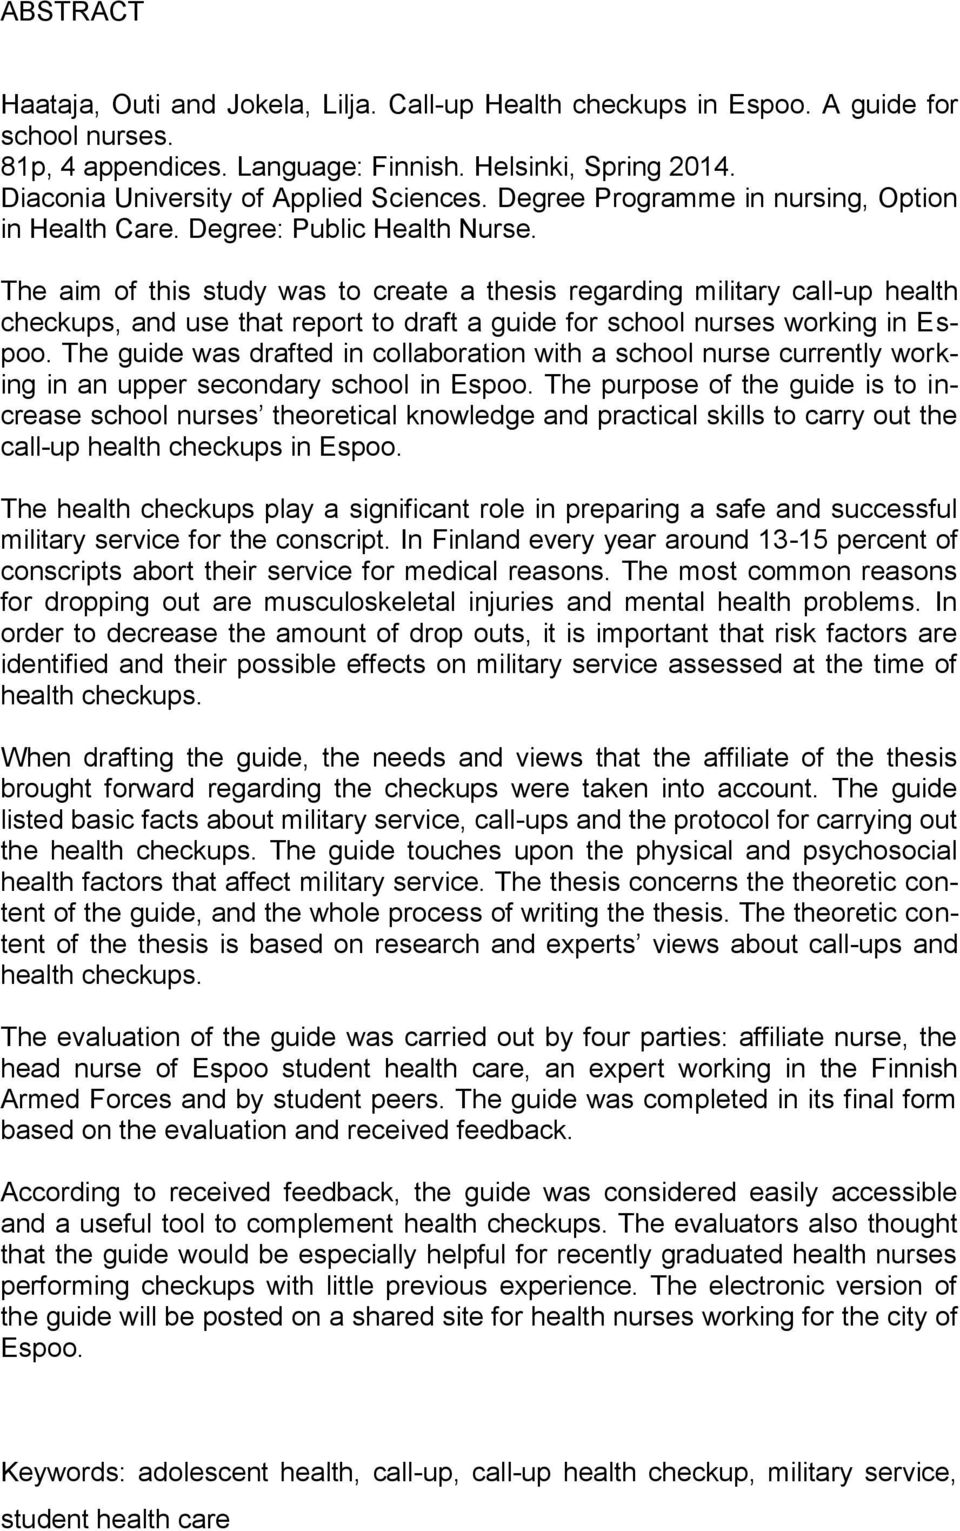 The aim of this study was to create a thesis regarding military call-up health checkups, and use that report to draft a guide for school nurses working in Espoo.